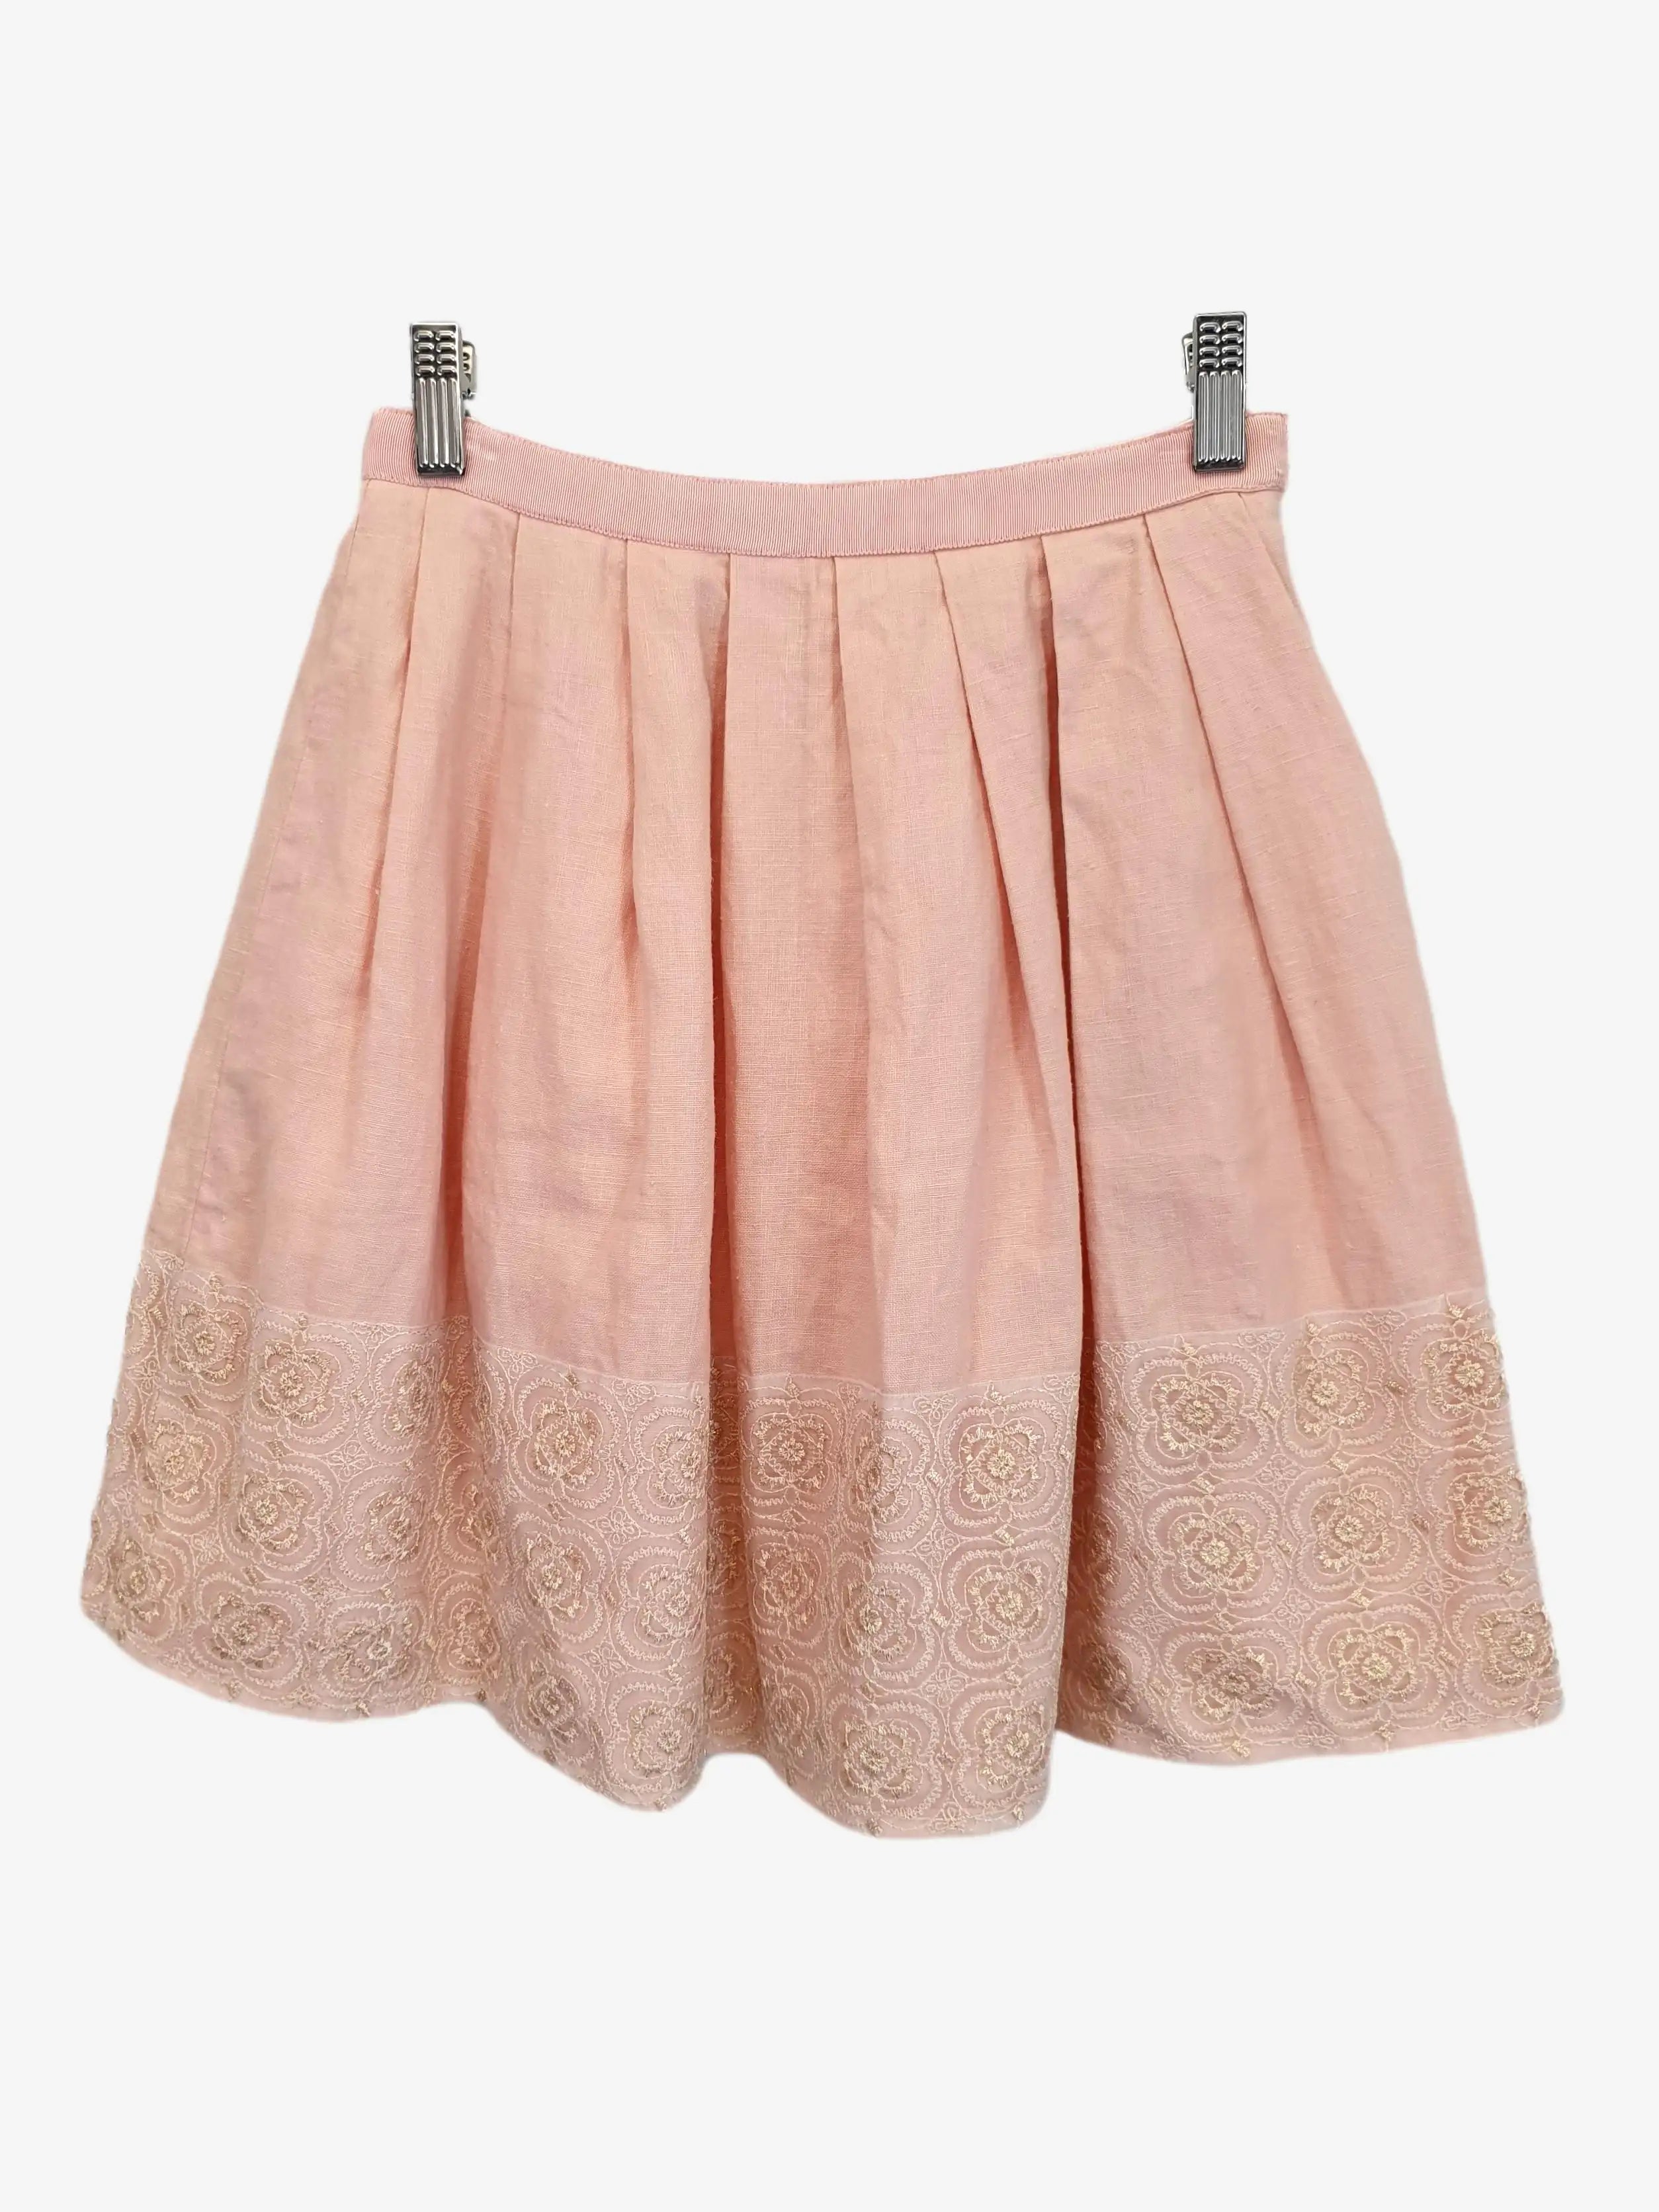 Alannah Hill Blush Lace Pleated Midi Skirt Size 6 – SwapUp